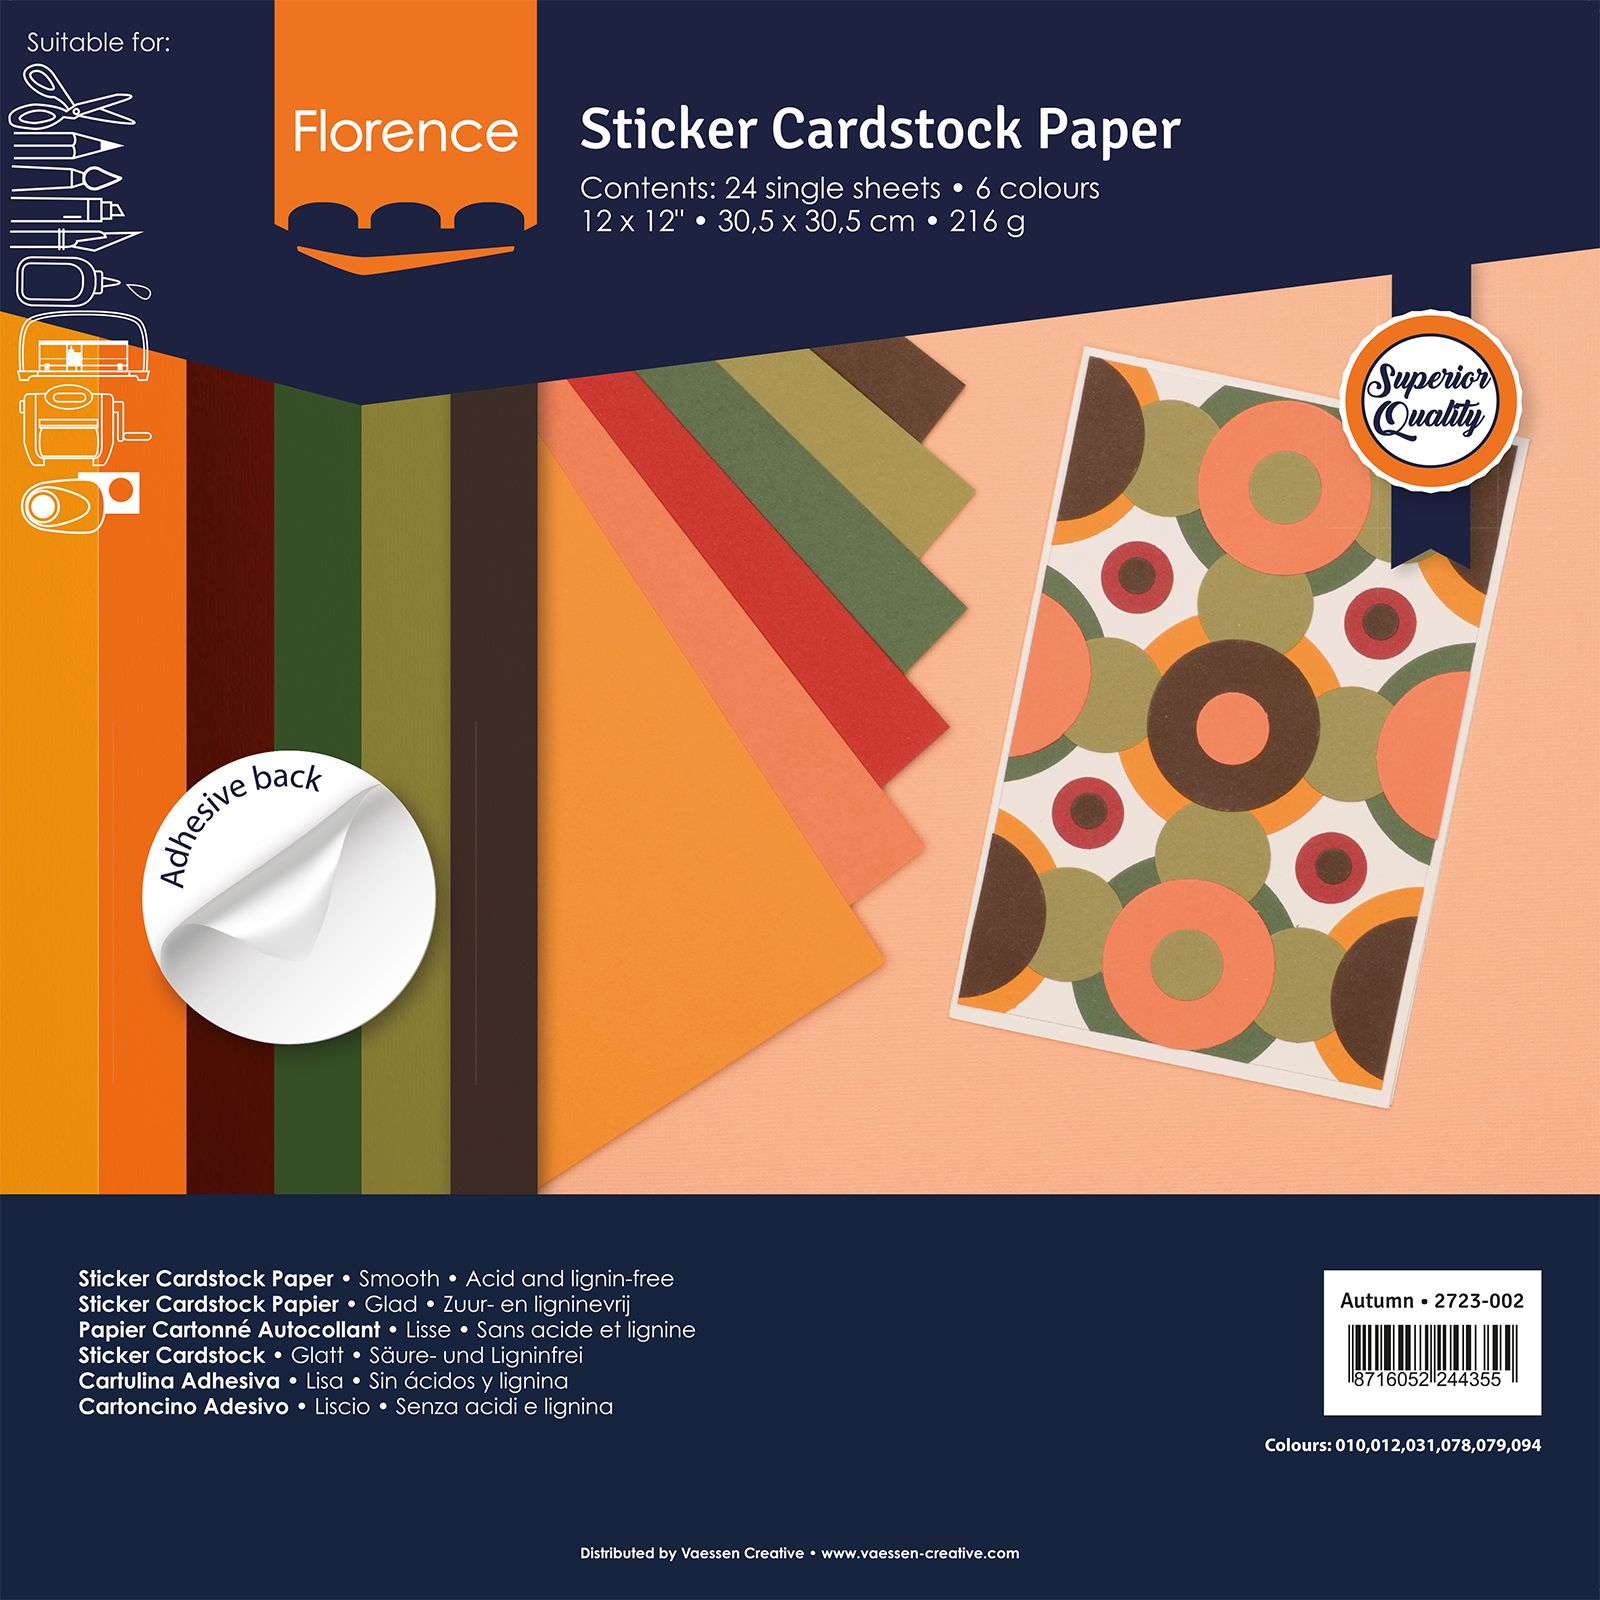 Florence • Sticker Cardstock Paper Smooth 12x12 Autumn 24 sheets